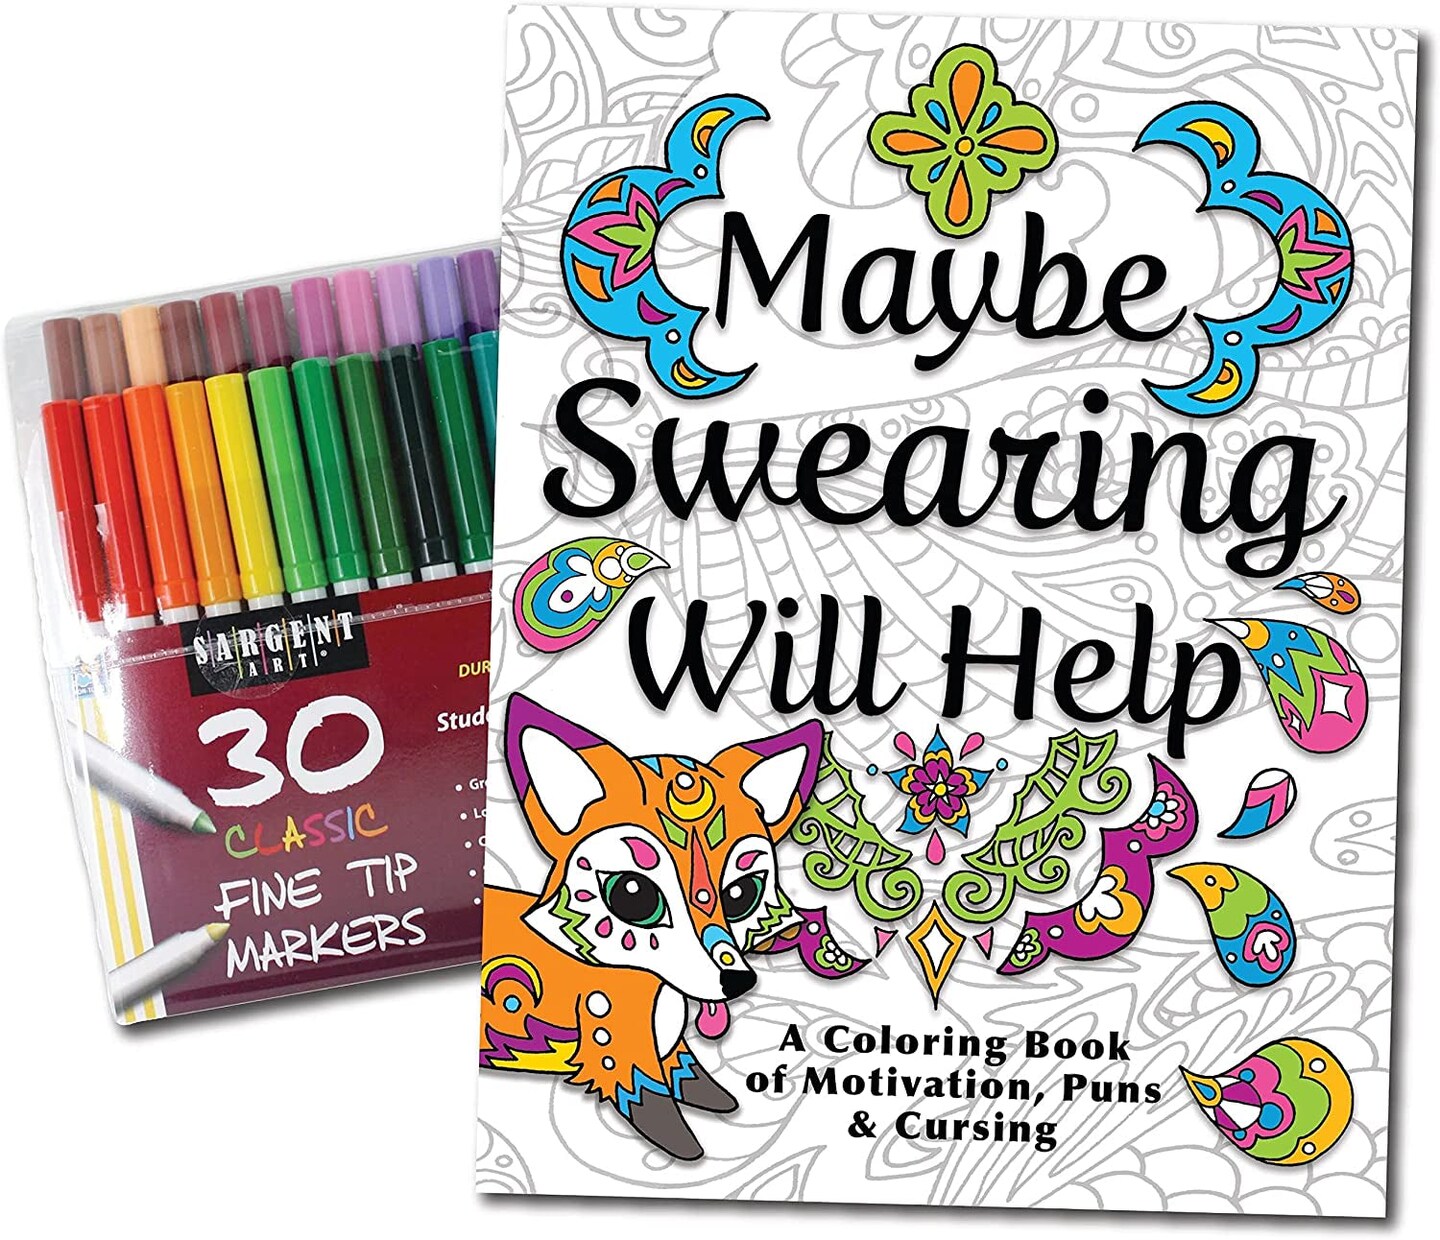 cursing coloring book for adults only : adult swear word coloring book and  pencils, cursing coloring book for adults, cussing coloring books, cursing coloring  book, adult swear word coloring book and pencils